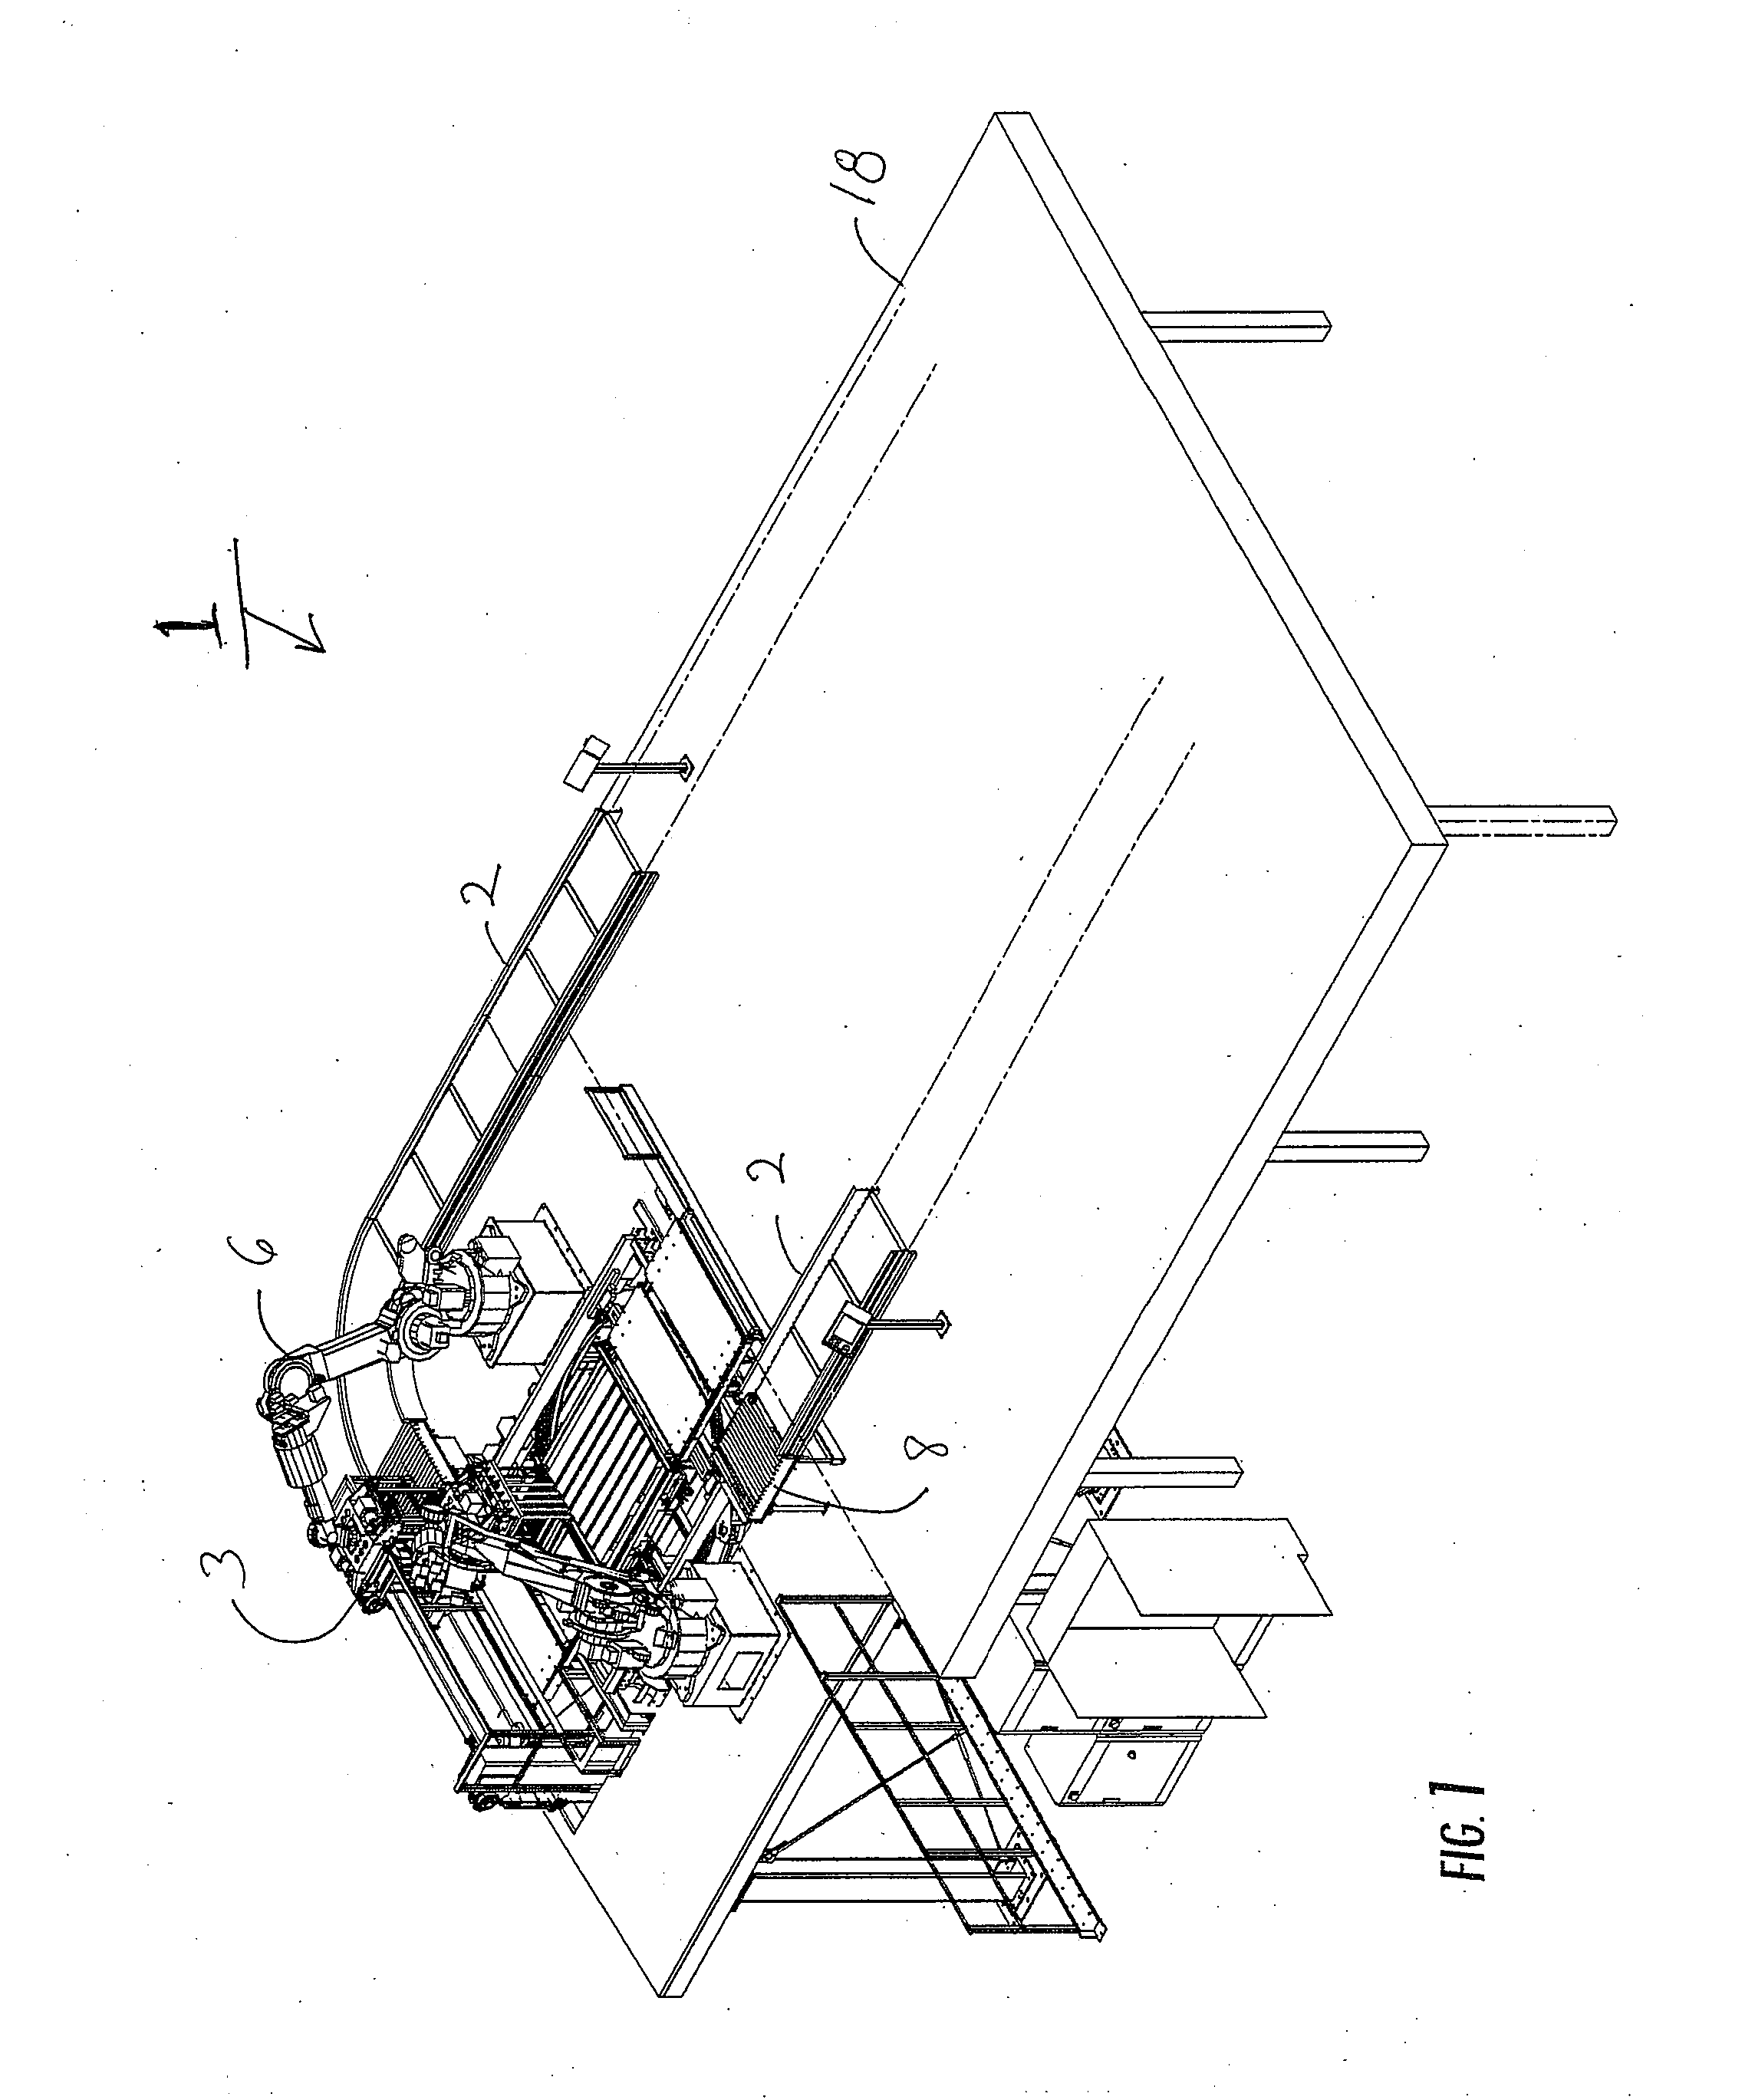 Stacking apparatus and method of multi-layer stacking of objects on a support